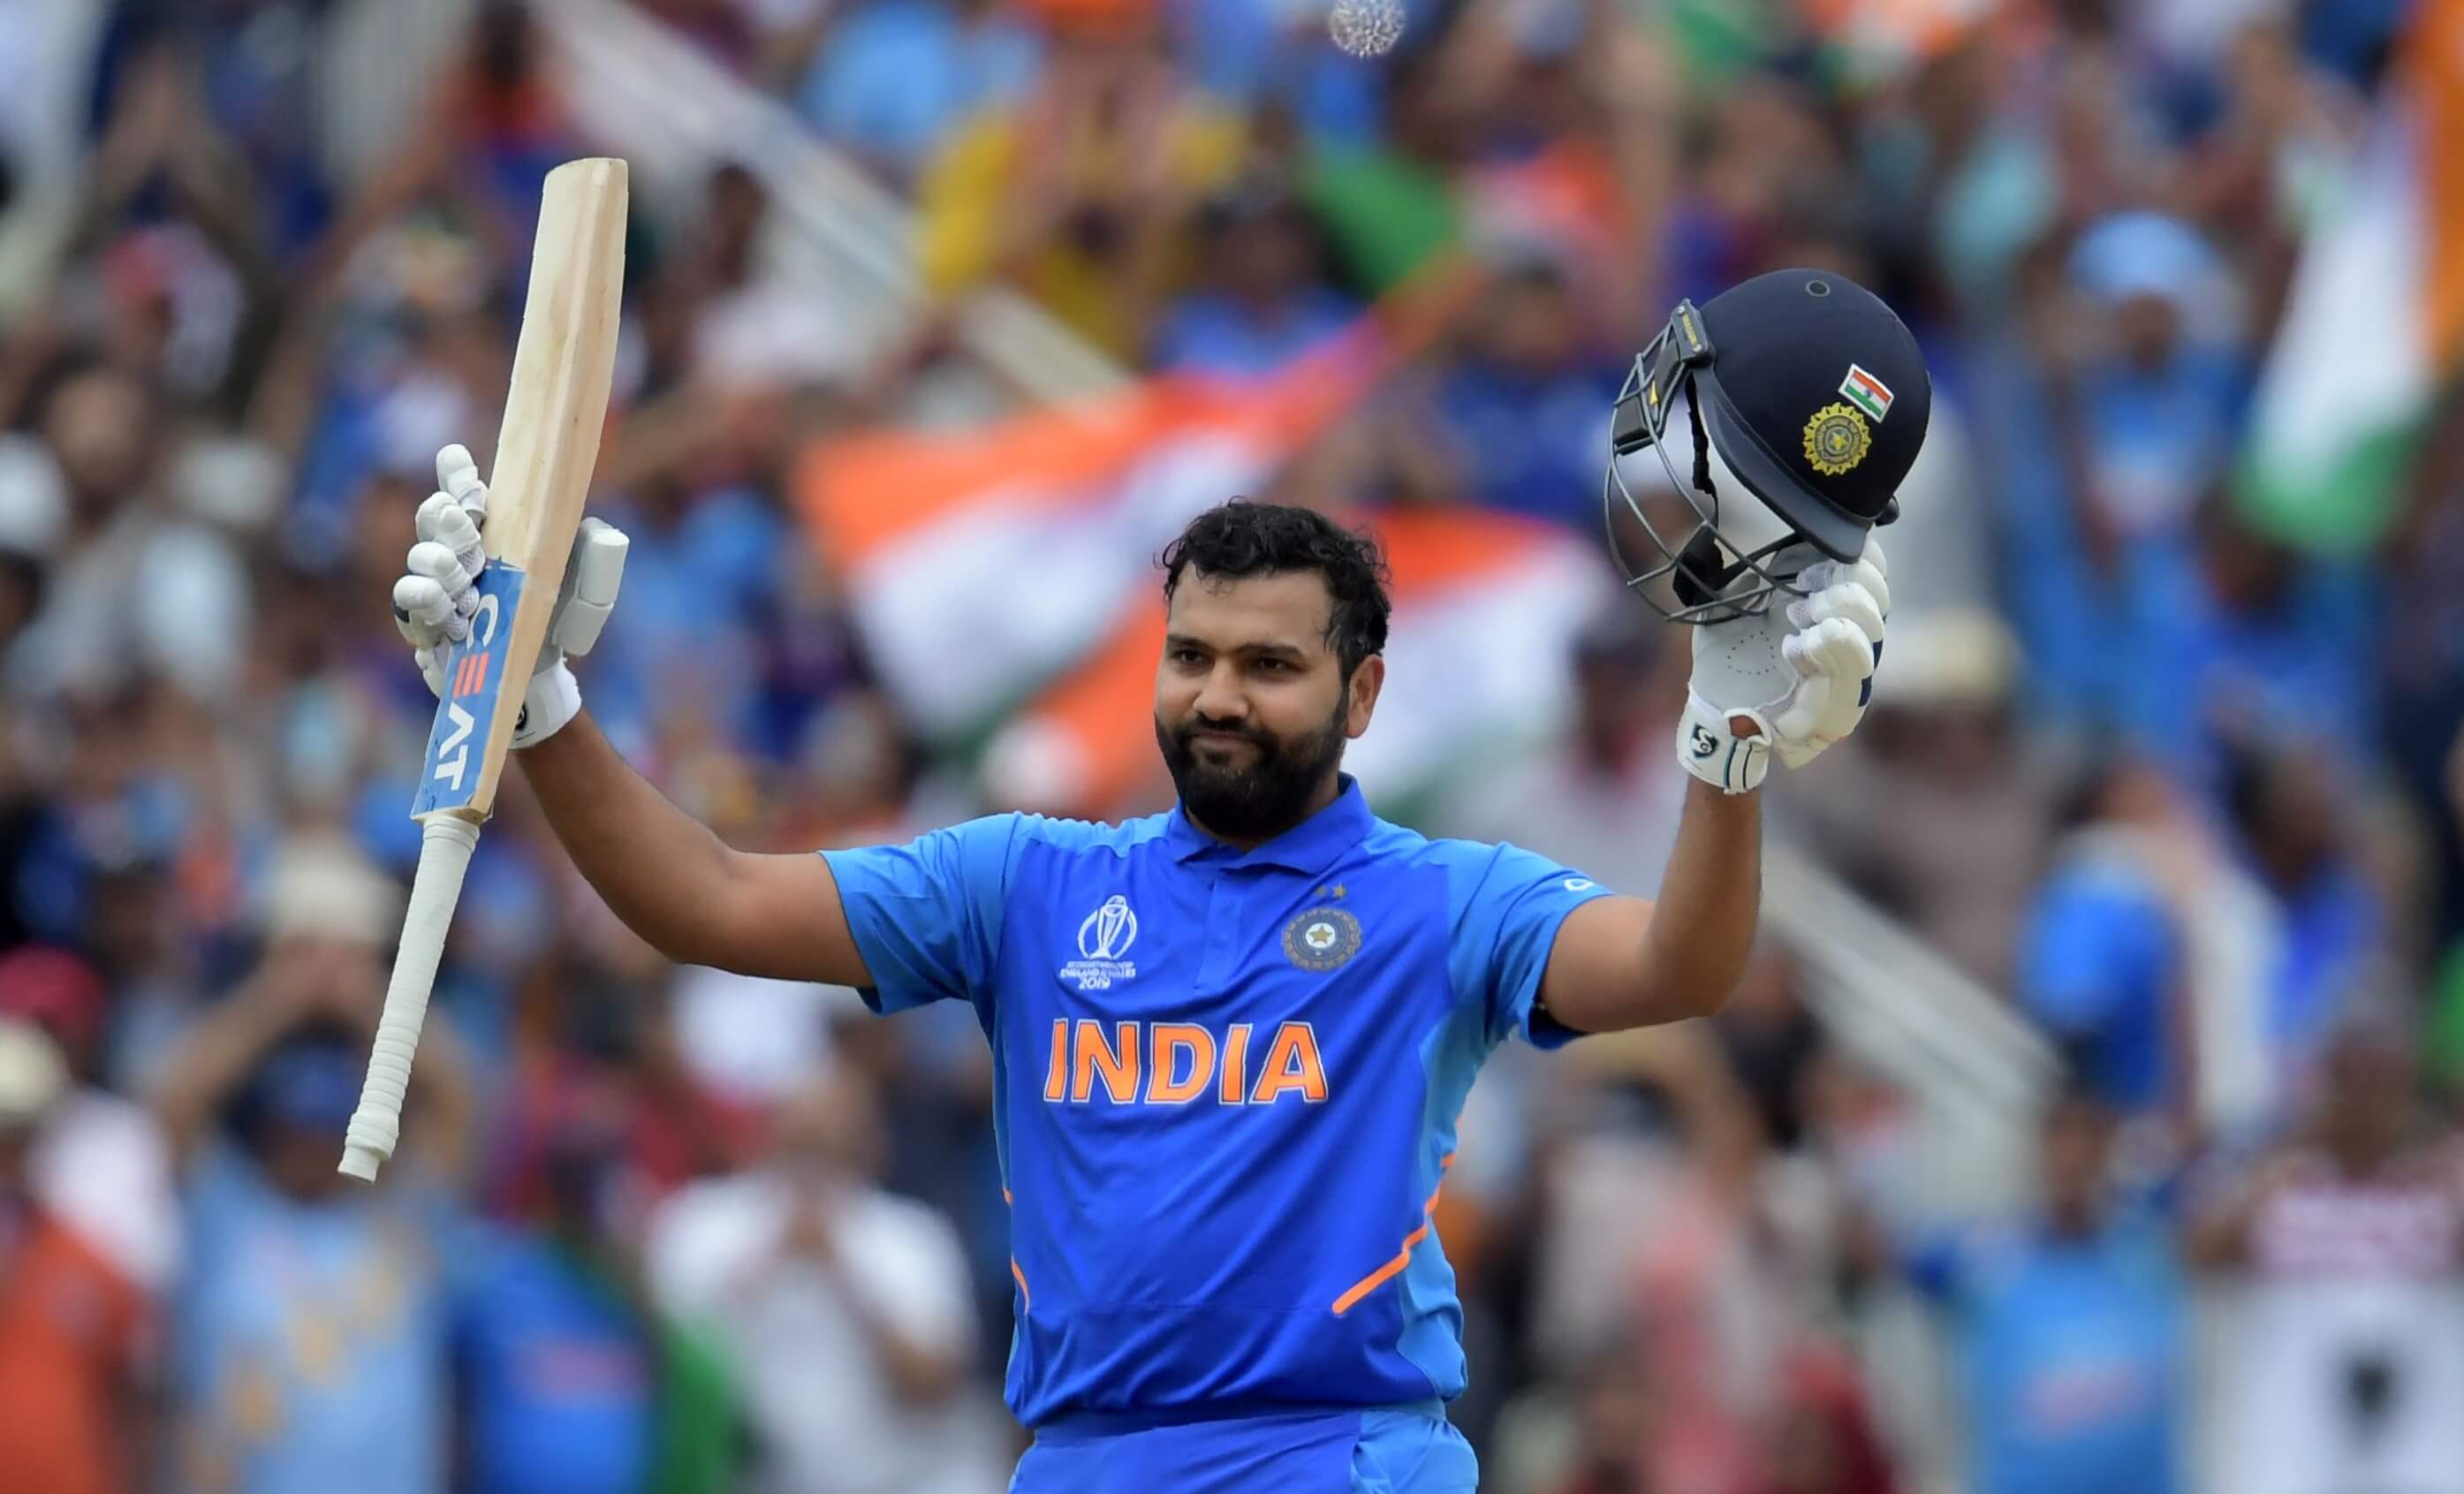 Rohit Sharma out of isolation after testing COVID-19 negative, to lead India in T20I series vs England